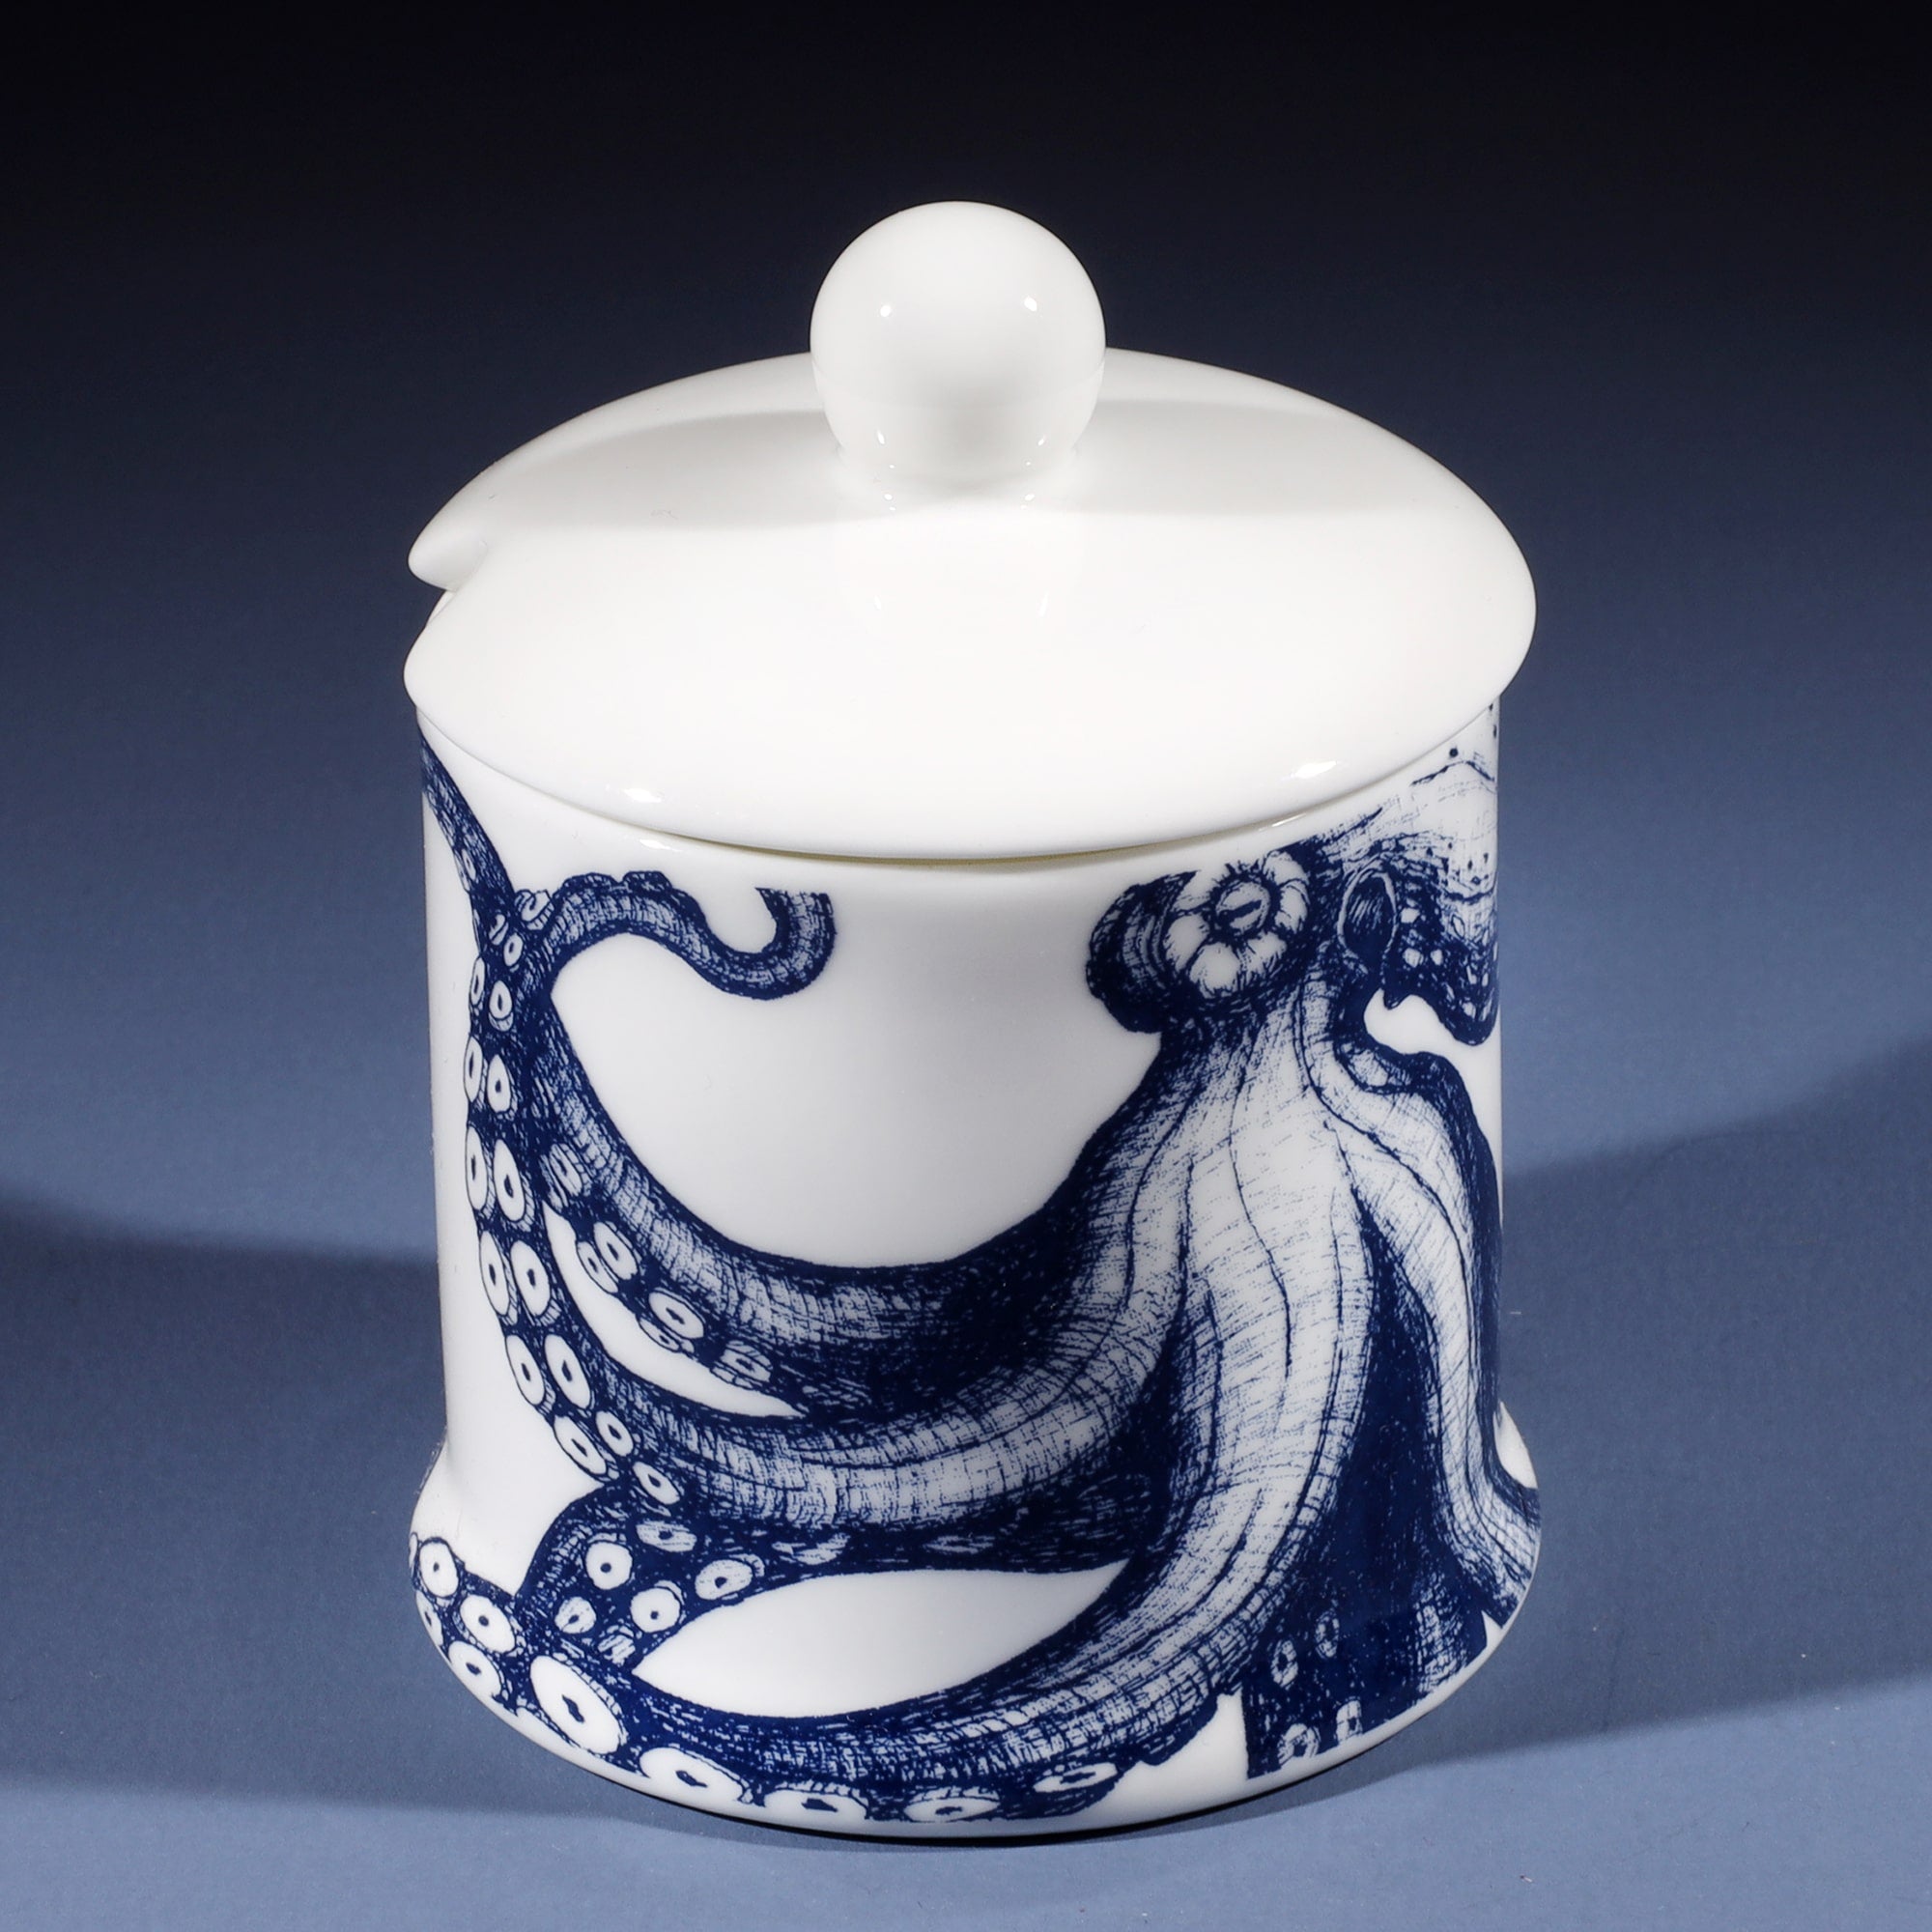 Jam Pot with lid in our classic range in the Octopus design with a space in the lid for a tea spoon